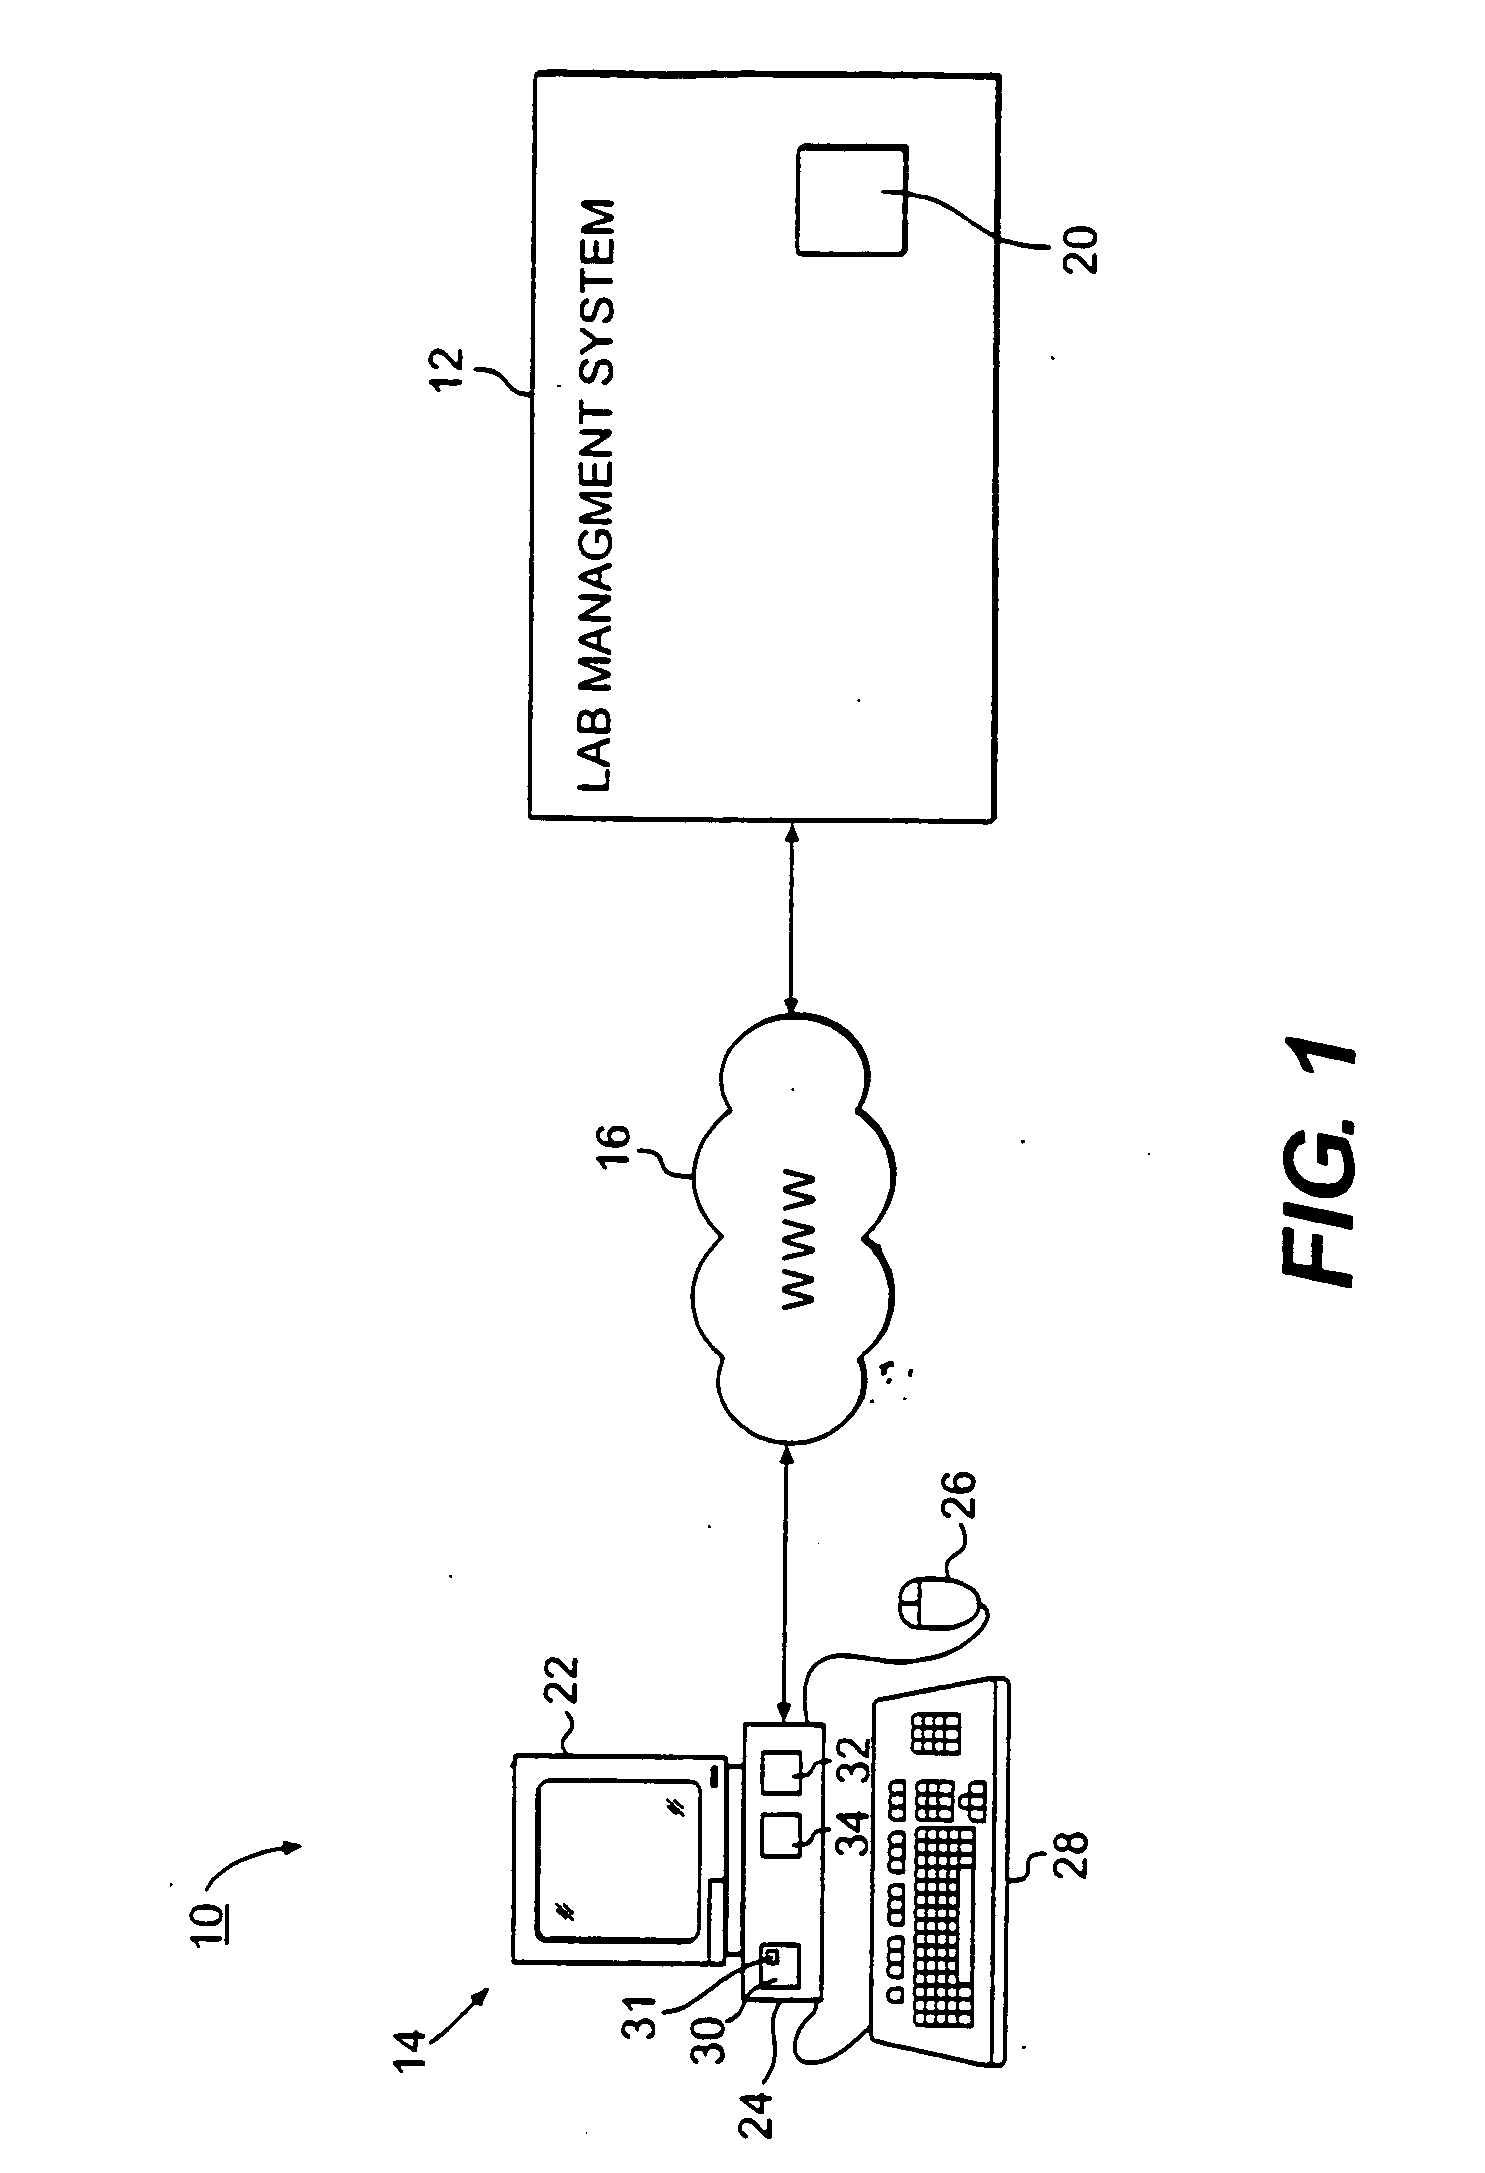 System and method for remotely configuring devices for testing scenarios